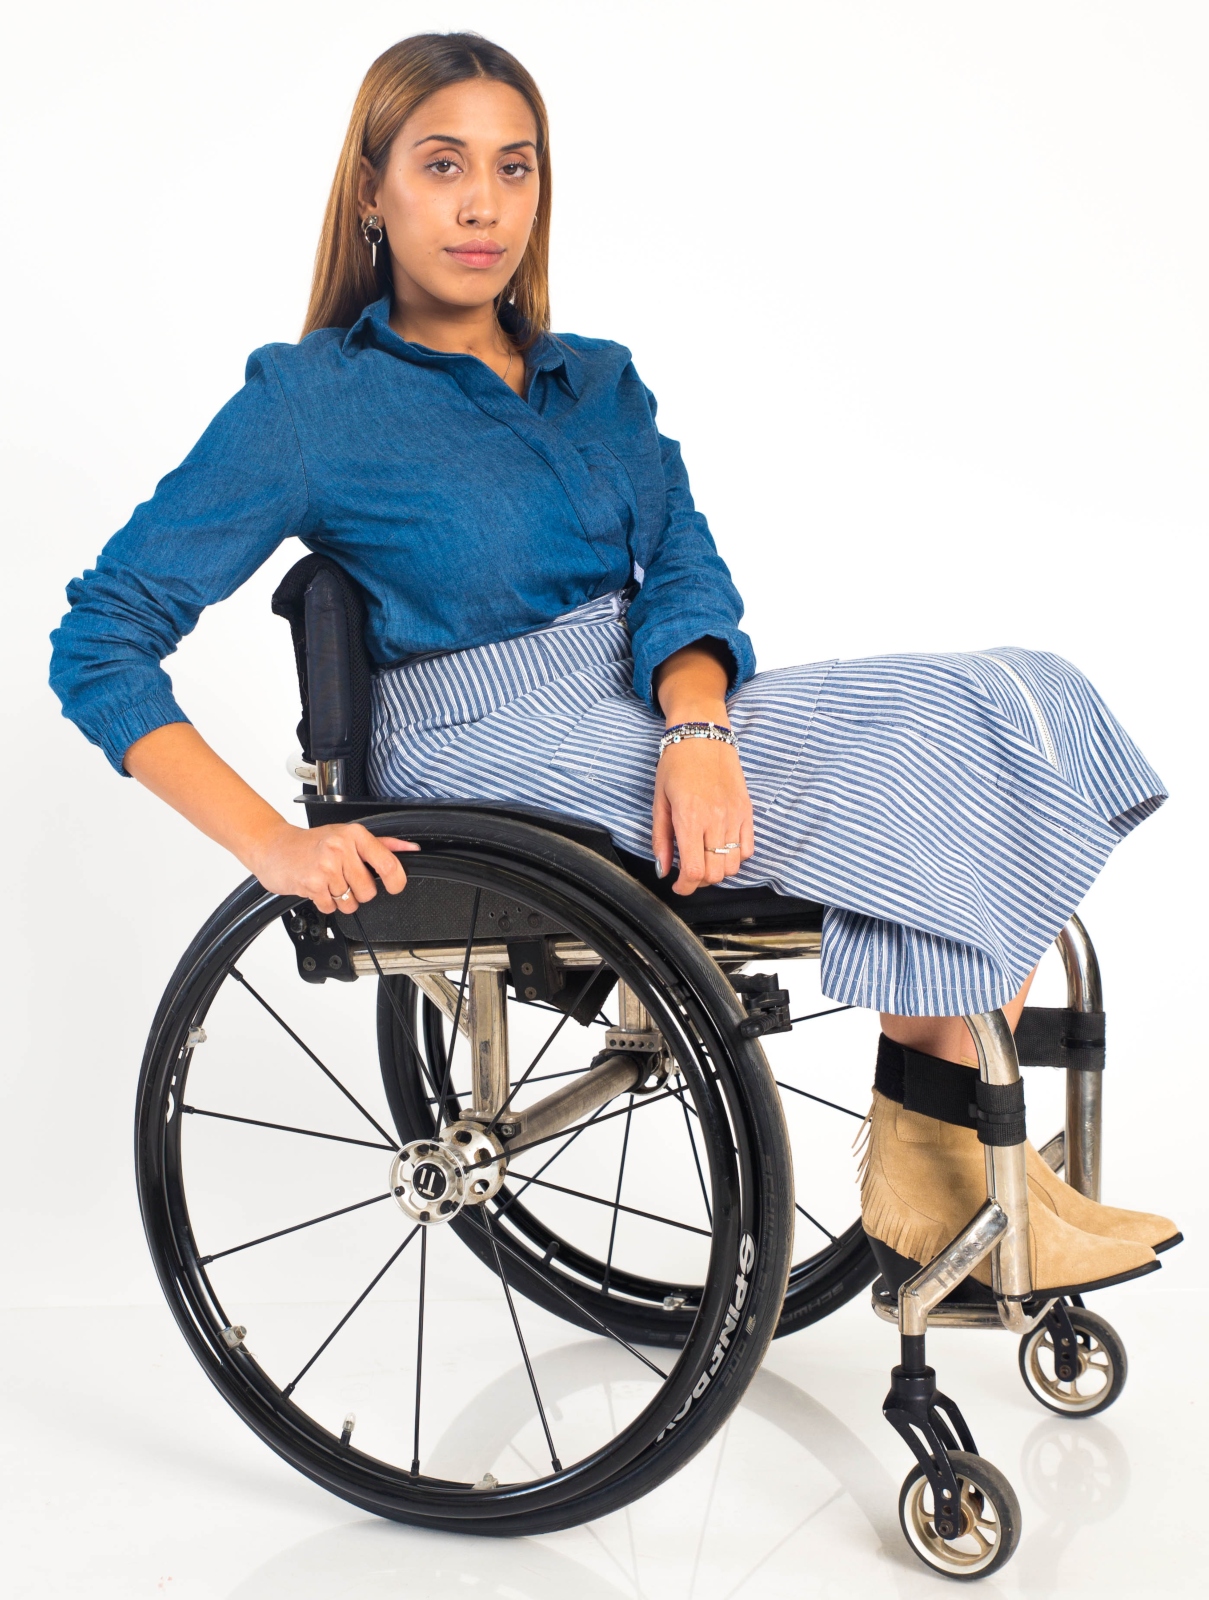 In Israel, fashion is for everyone – even those with disabilities ...